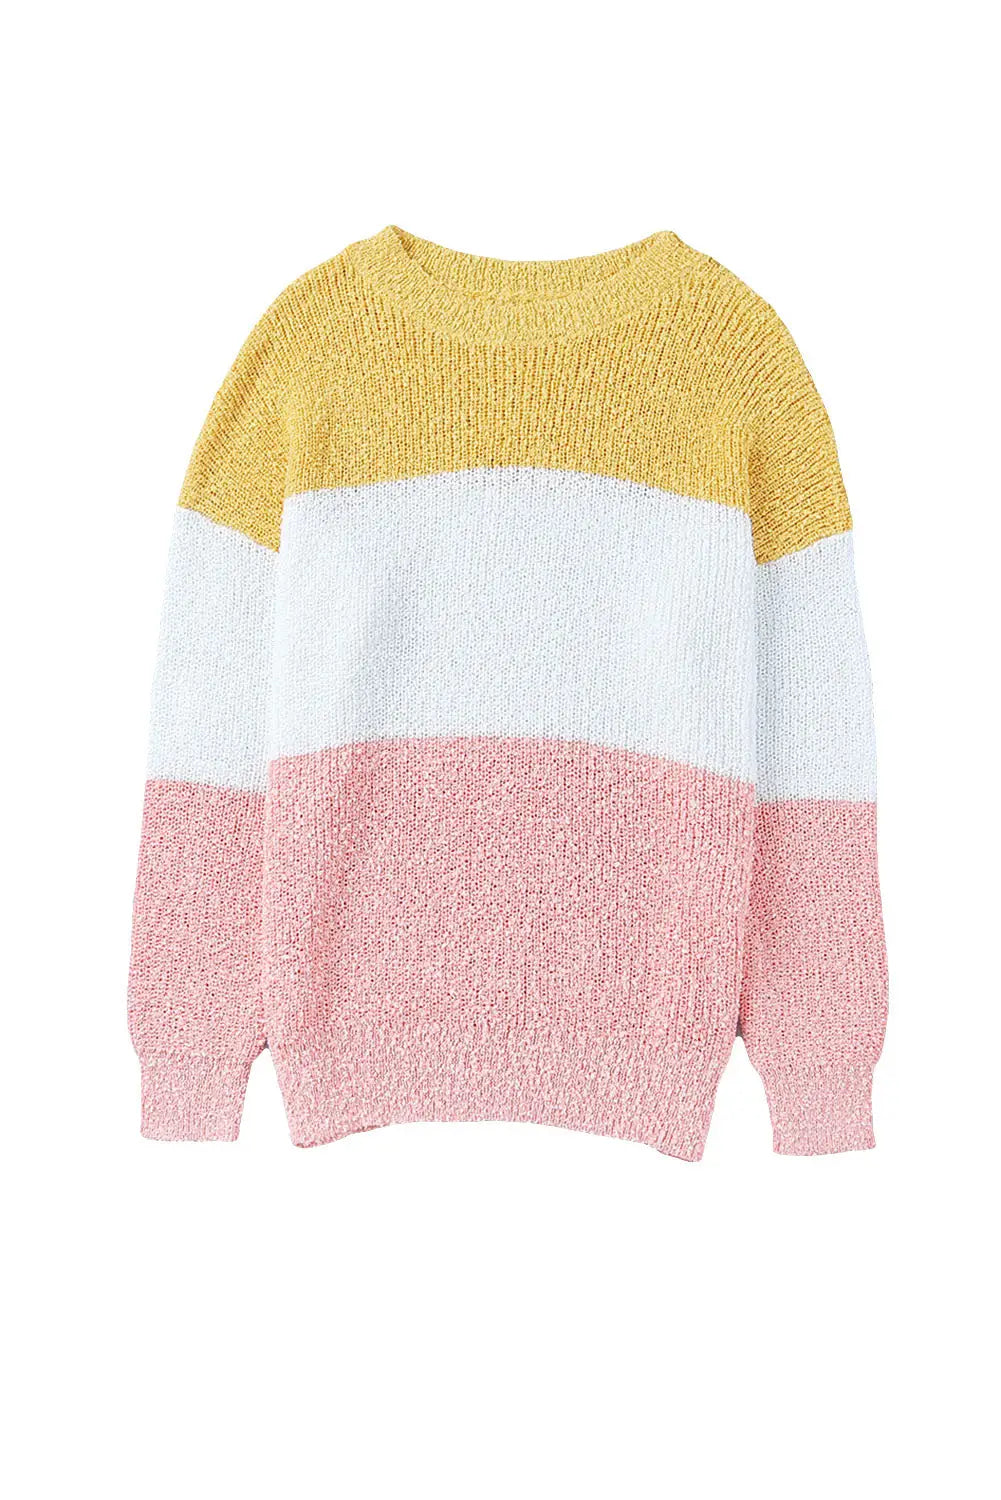 Yellow colorblock bubble sleeve plus size sweater